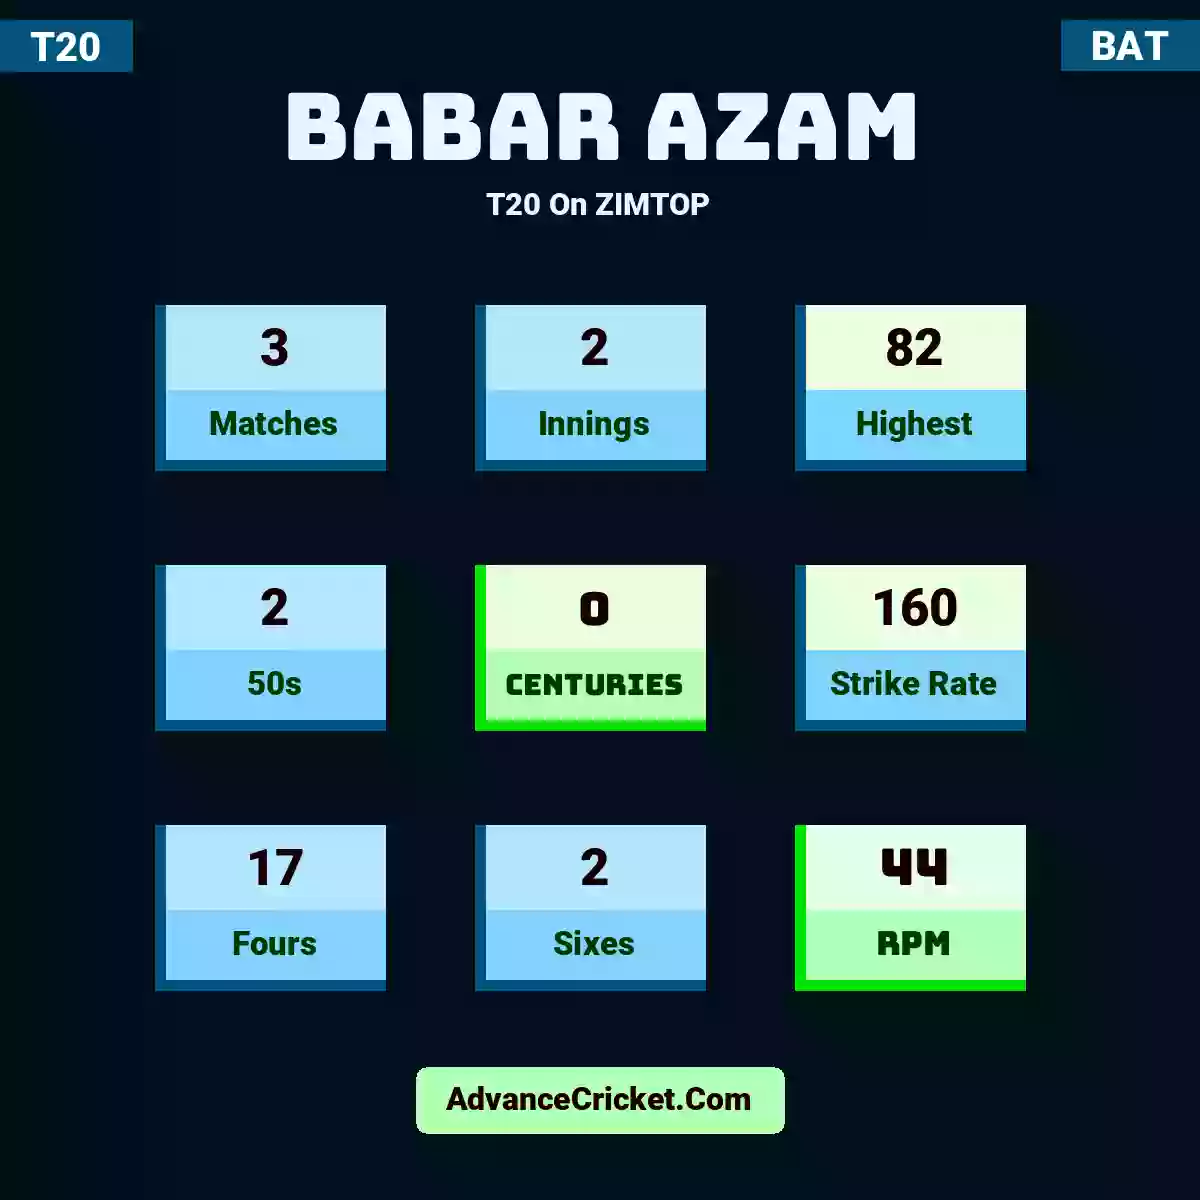 Babar Azam T20  On ZIMTOP, Babar Azam played 3 matches, scored 82 runs as highest, 2 half-centuries, and 0 centuries, with a strike rate of 160. B.Azam hit 17 fours and 2 sixes, with an RPM of 44.